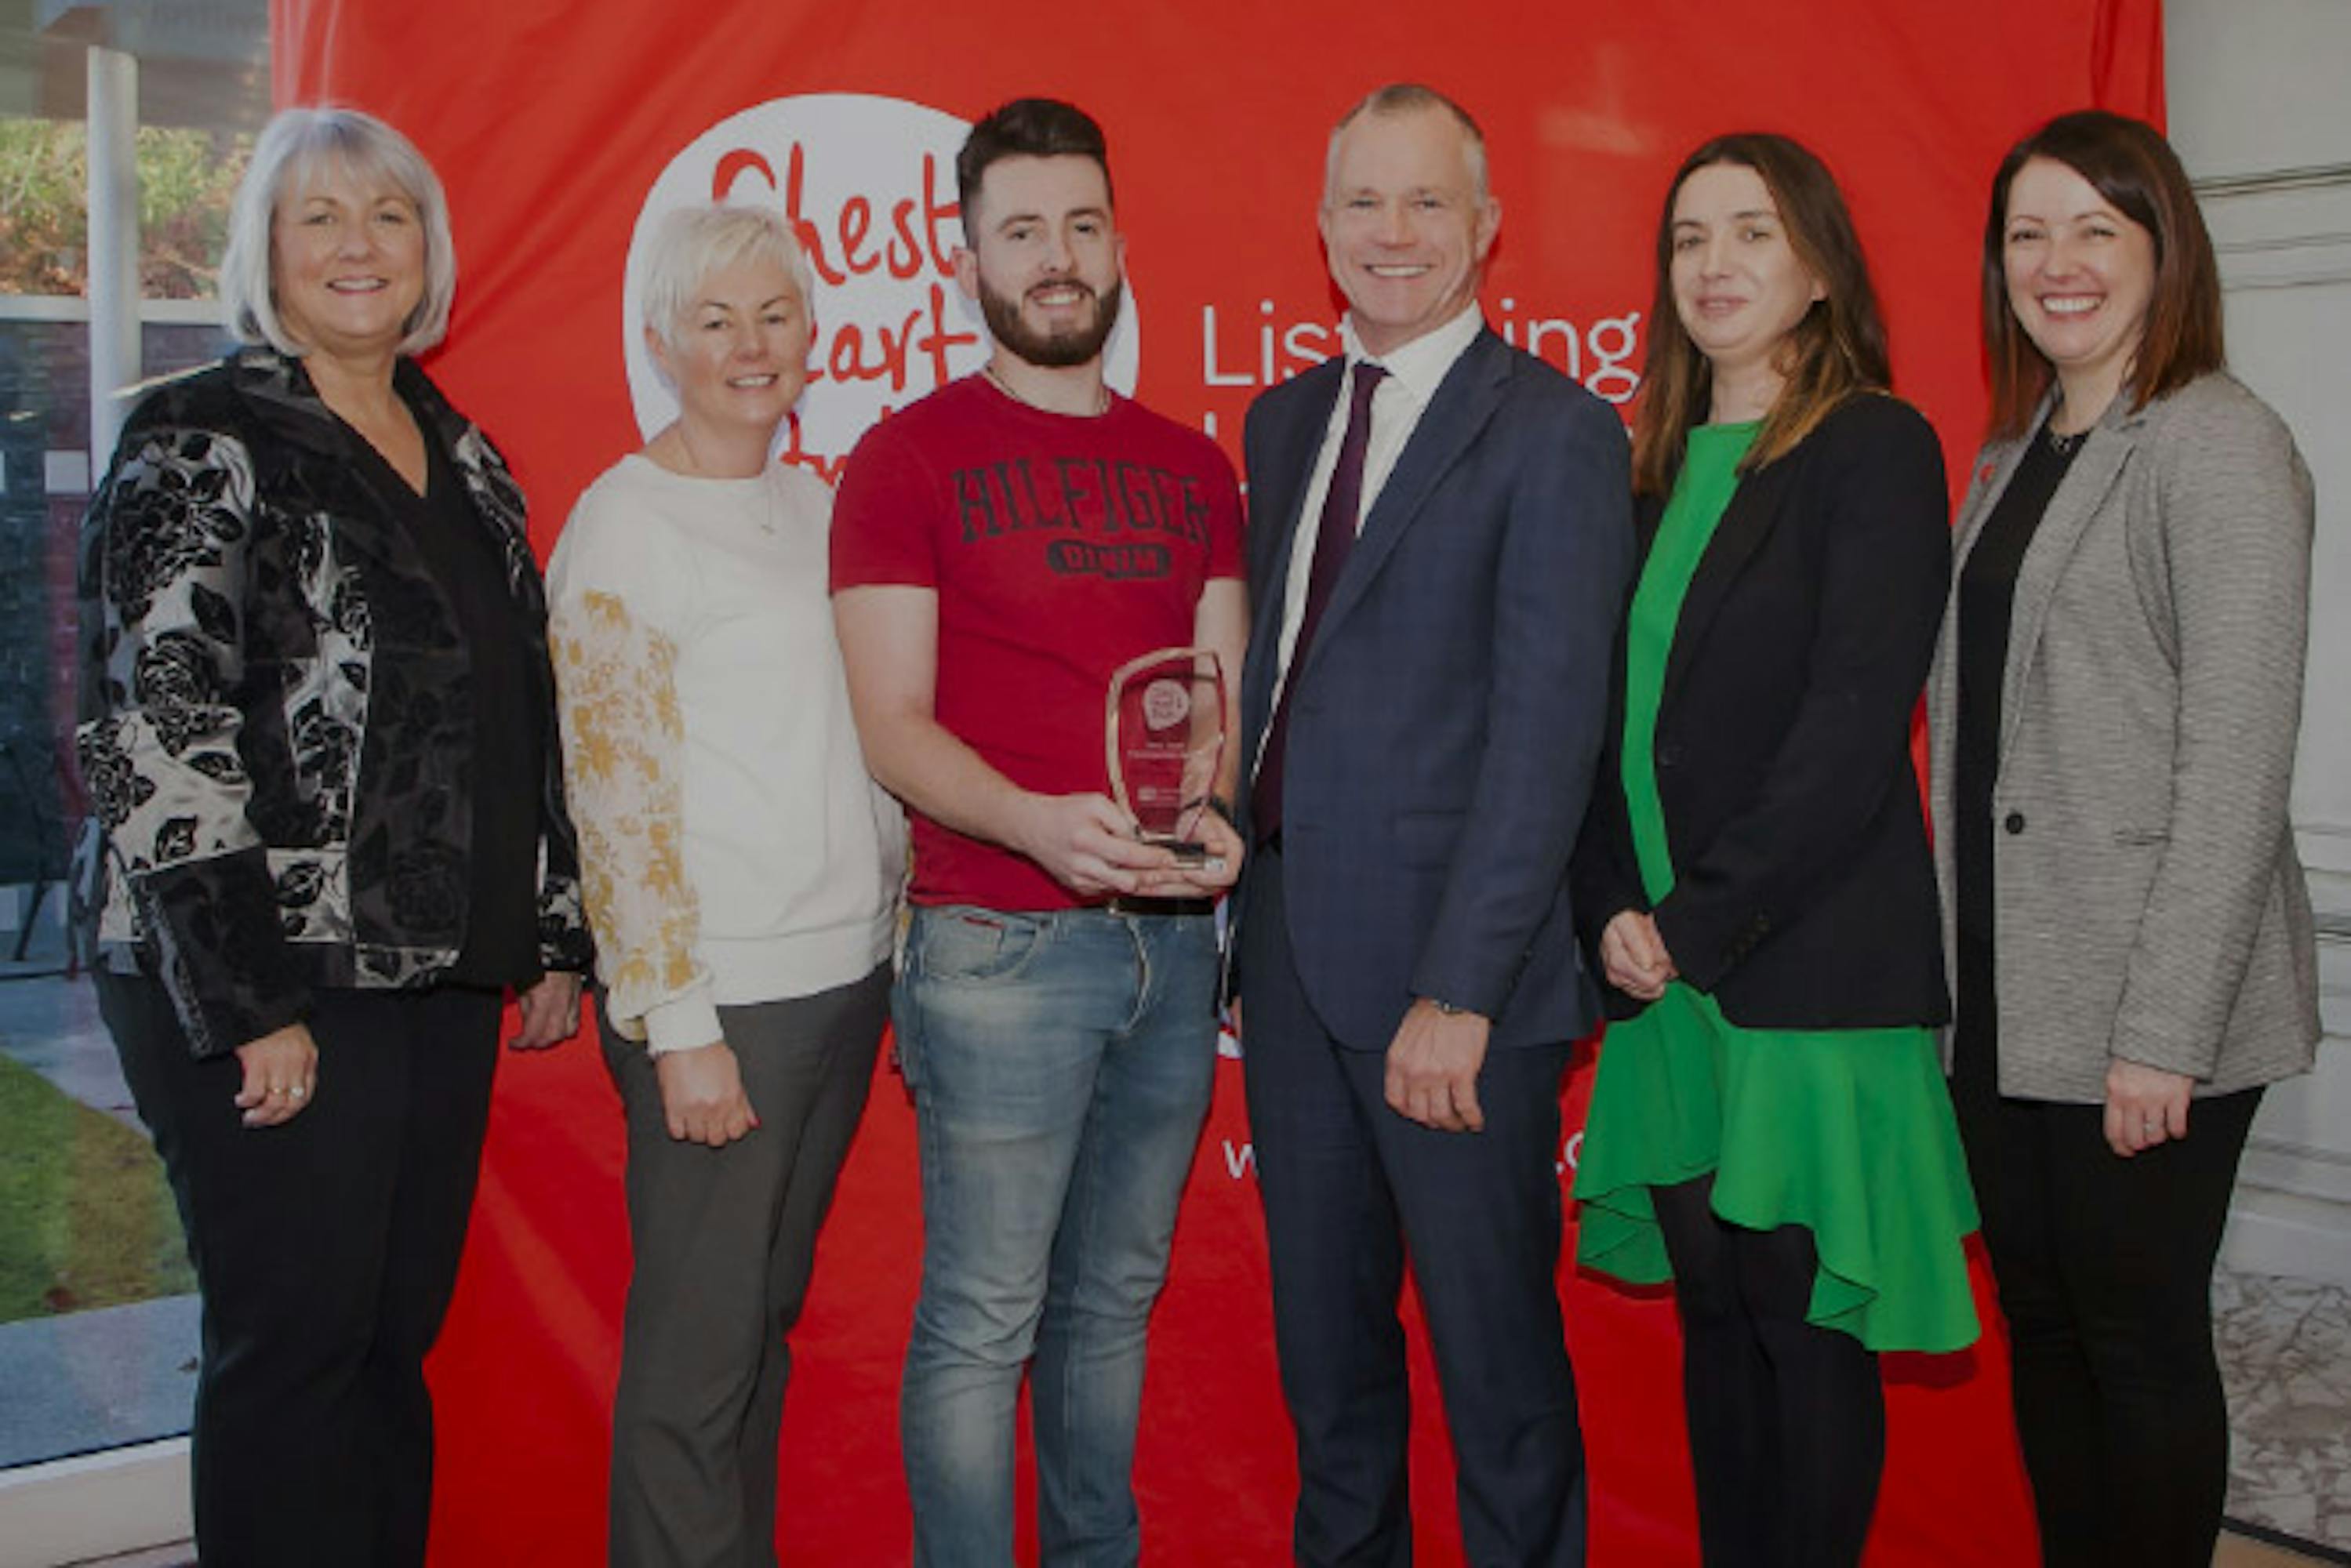 One person accepting a trophy from CEO of Northern Ireland Chest Heart & Stoke with six individuals in picture.  